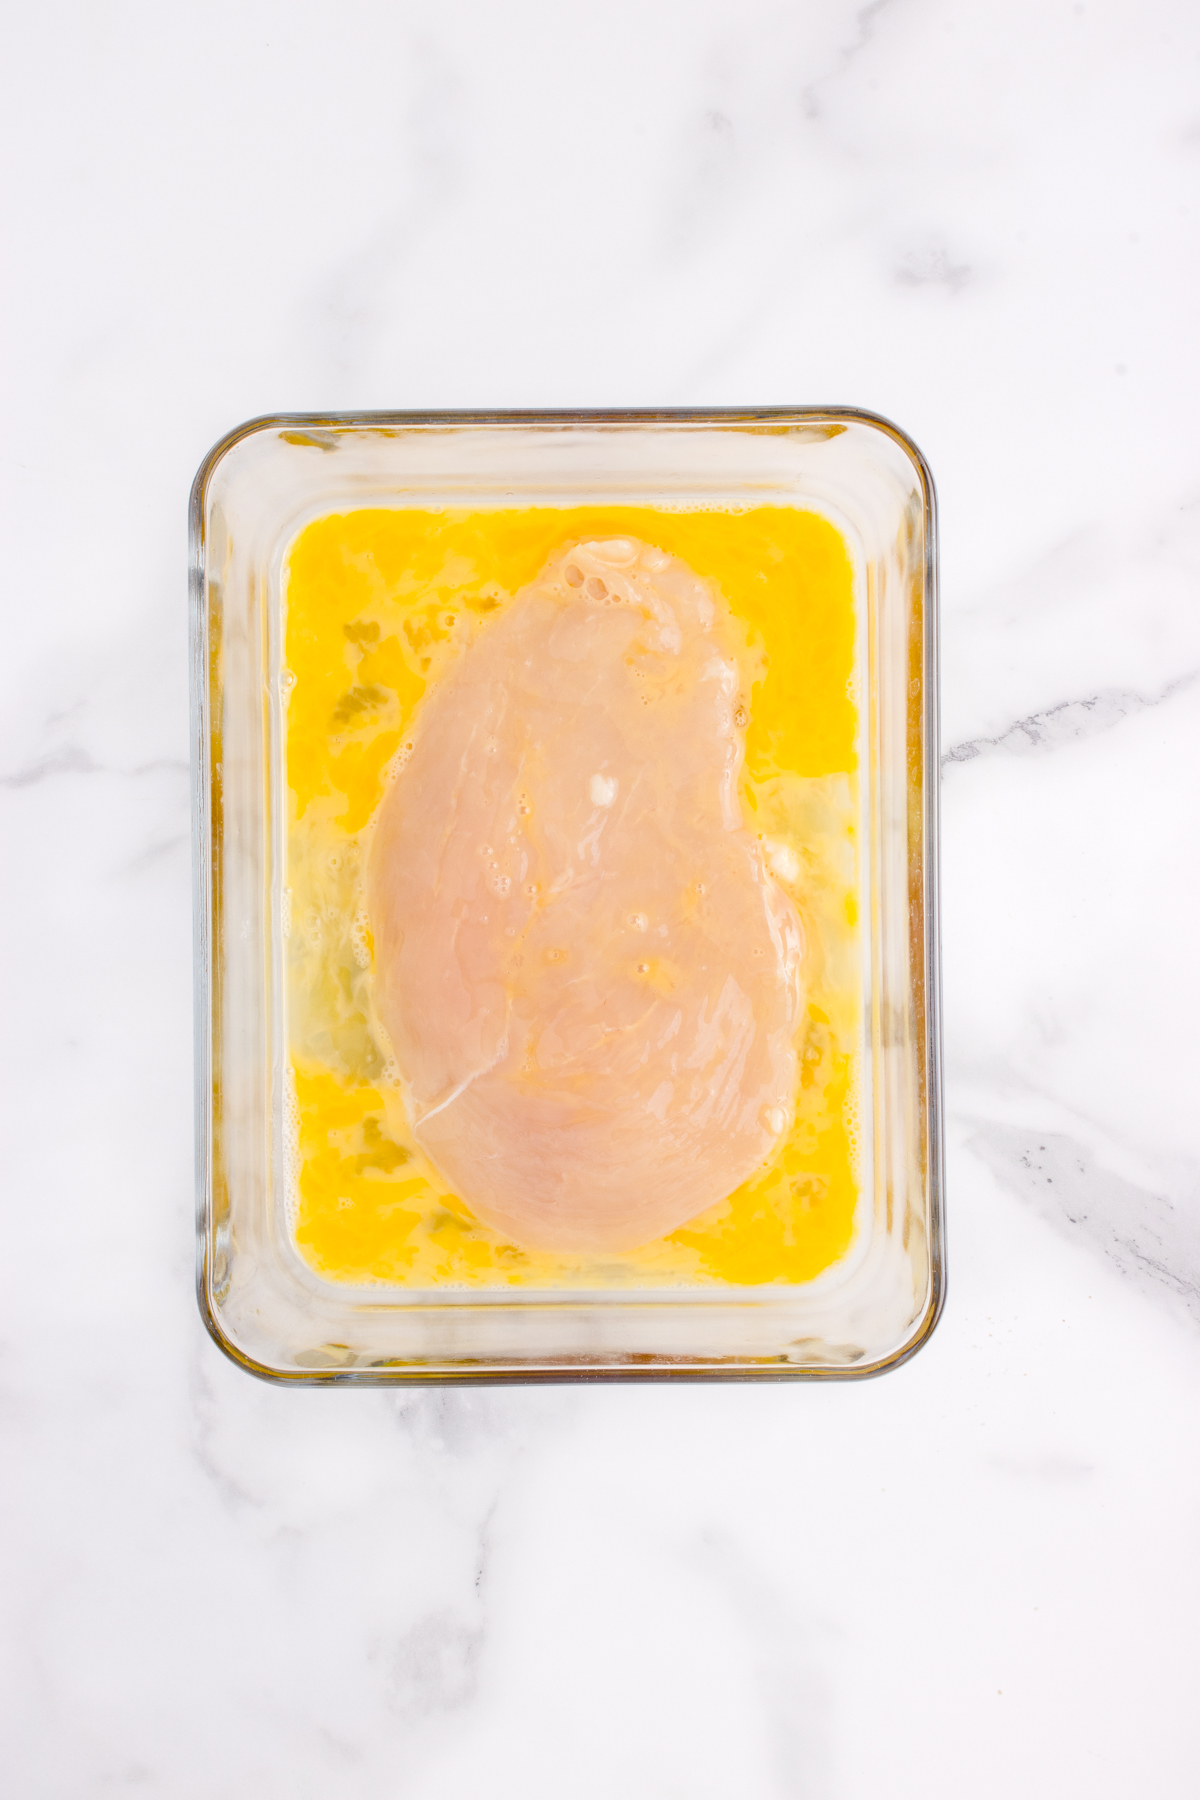 Chicken breast being dipped in egg.